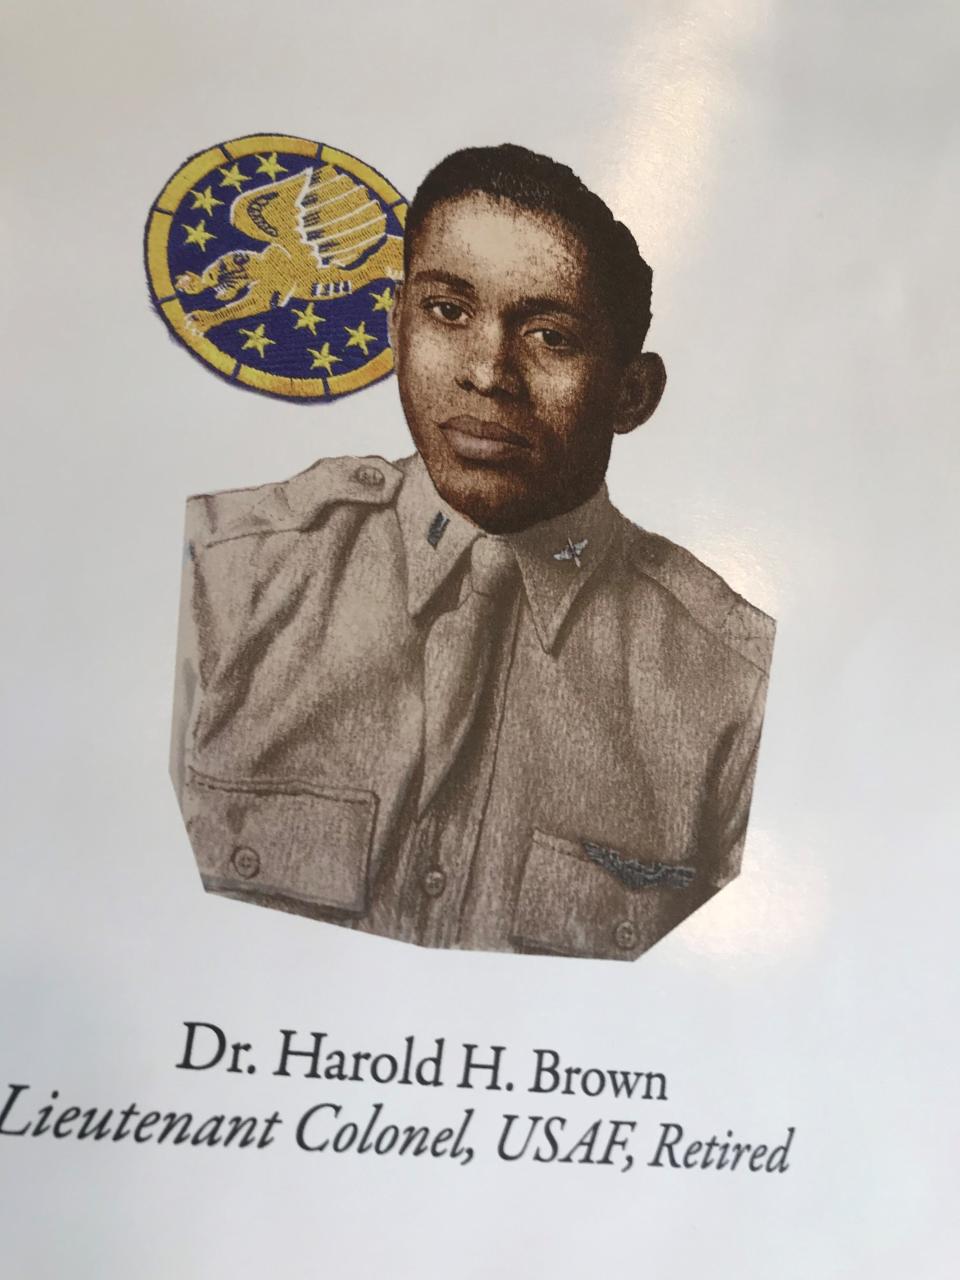 This image of Tuskegee Airman Harold Brown appears on limited-edition lithographs for the Gathering of Eagles Foundation's Class of 2021 program. Brown, an Ottawa County resident, is a member of the group's Class of 2021, which honors some of the nation's elite pilots and astronauts.